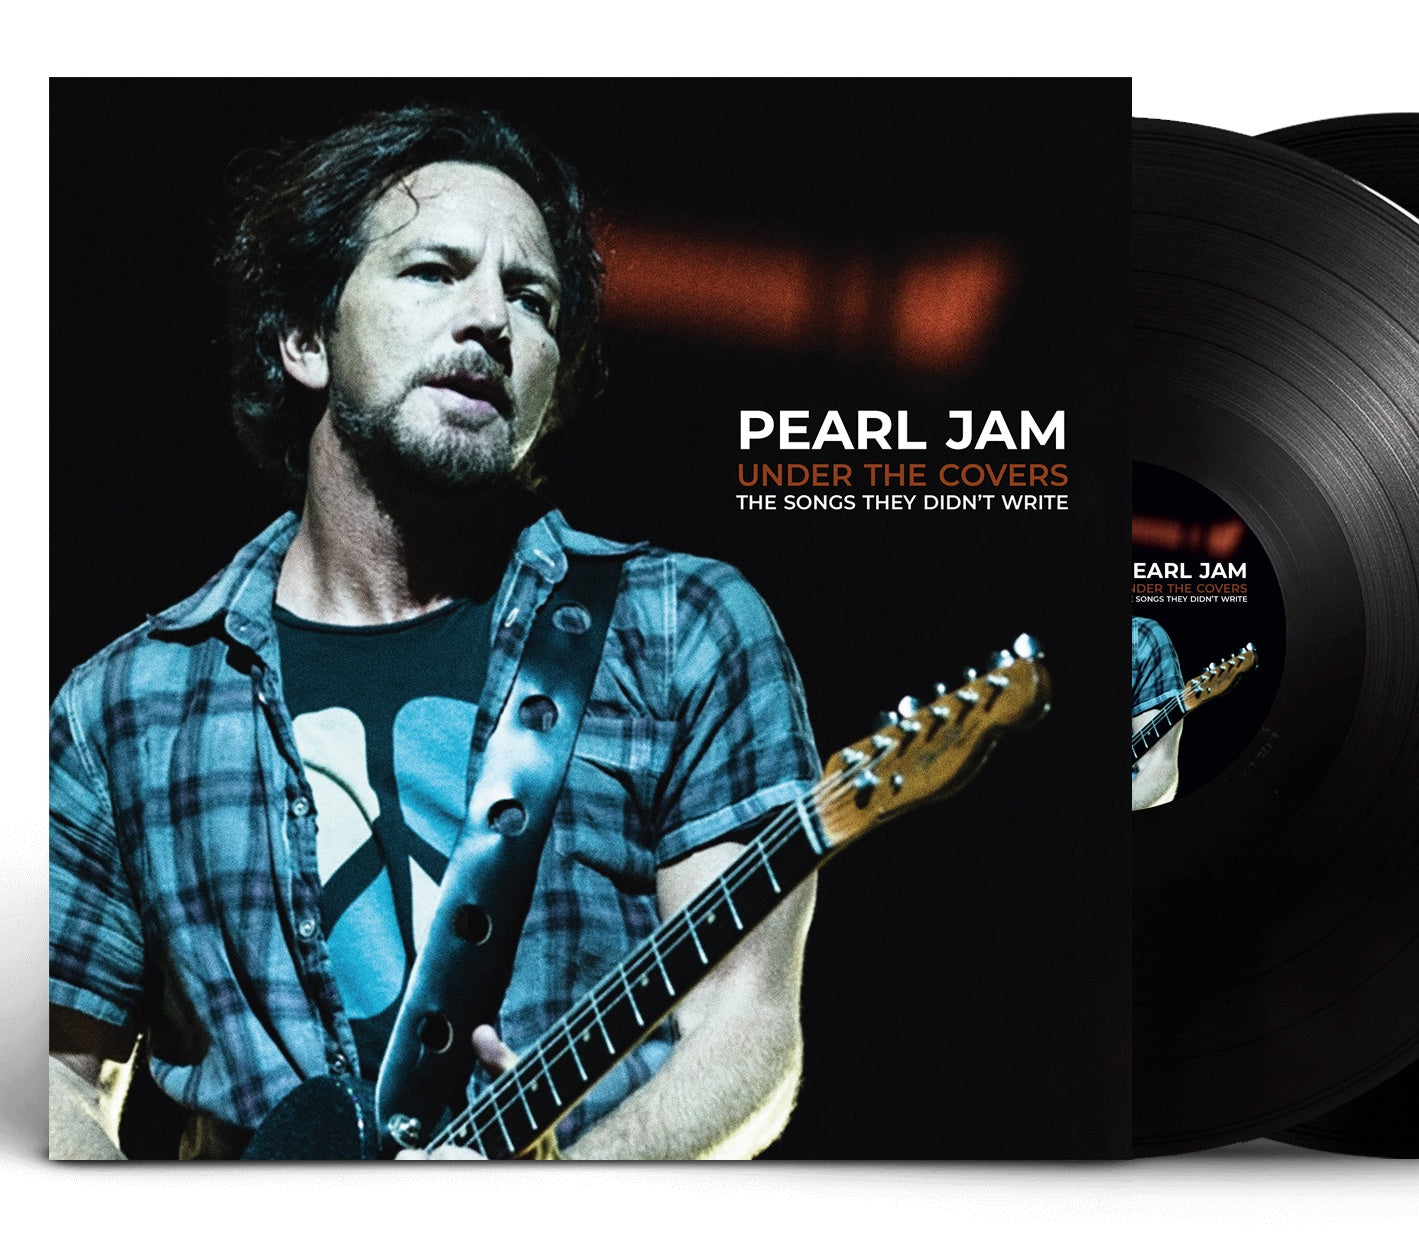 NEW - Pearl Jam, Under The Covers (Black) 2LP